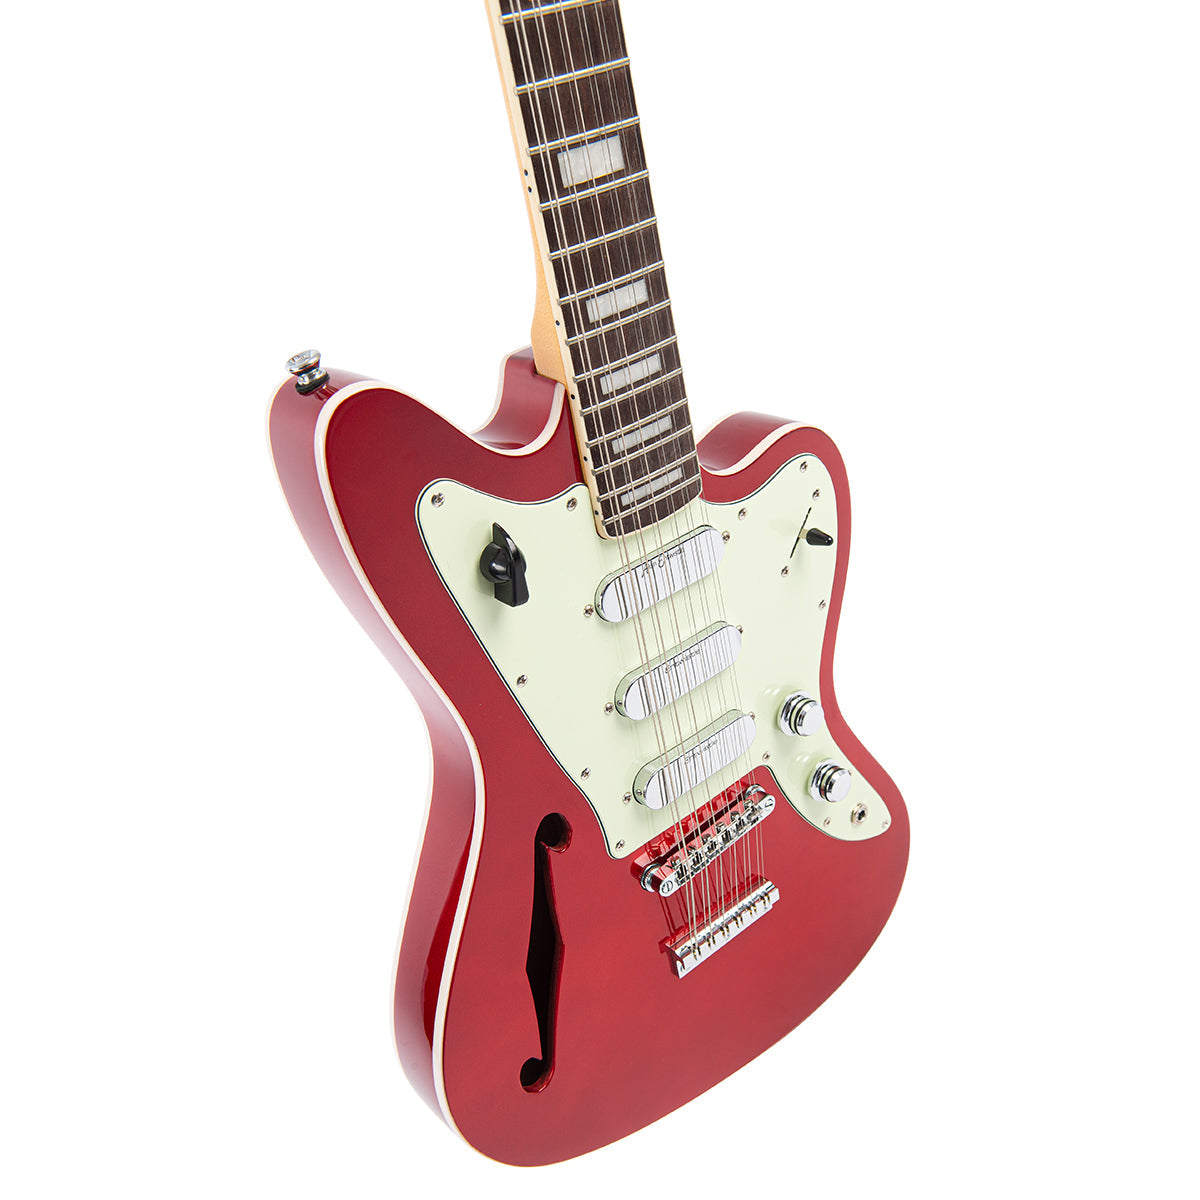 Vintage REVO Series 'Surfmaster Thinline 12' ~ Candy Apple Red, Electric Guitars for sale at Richards Guitars.